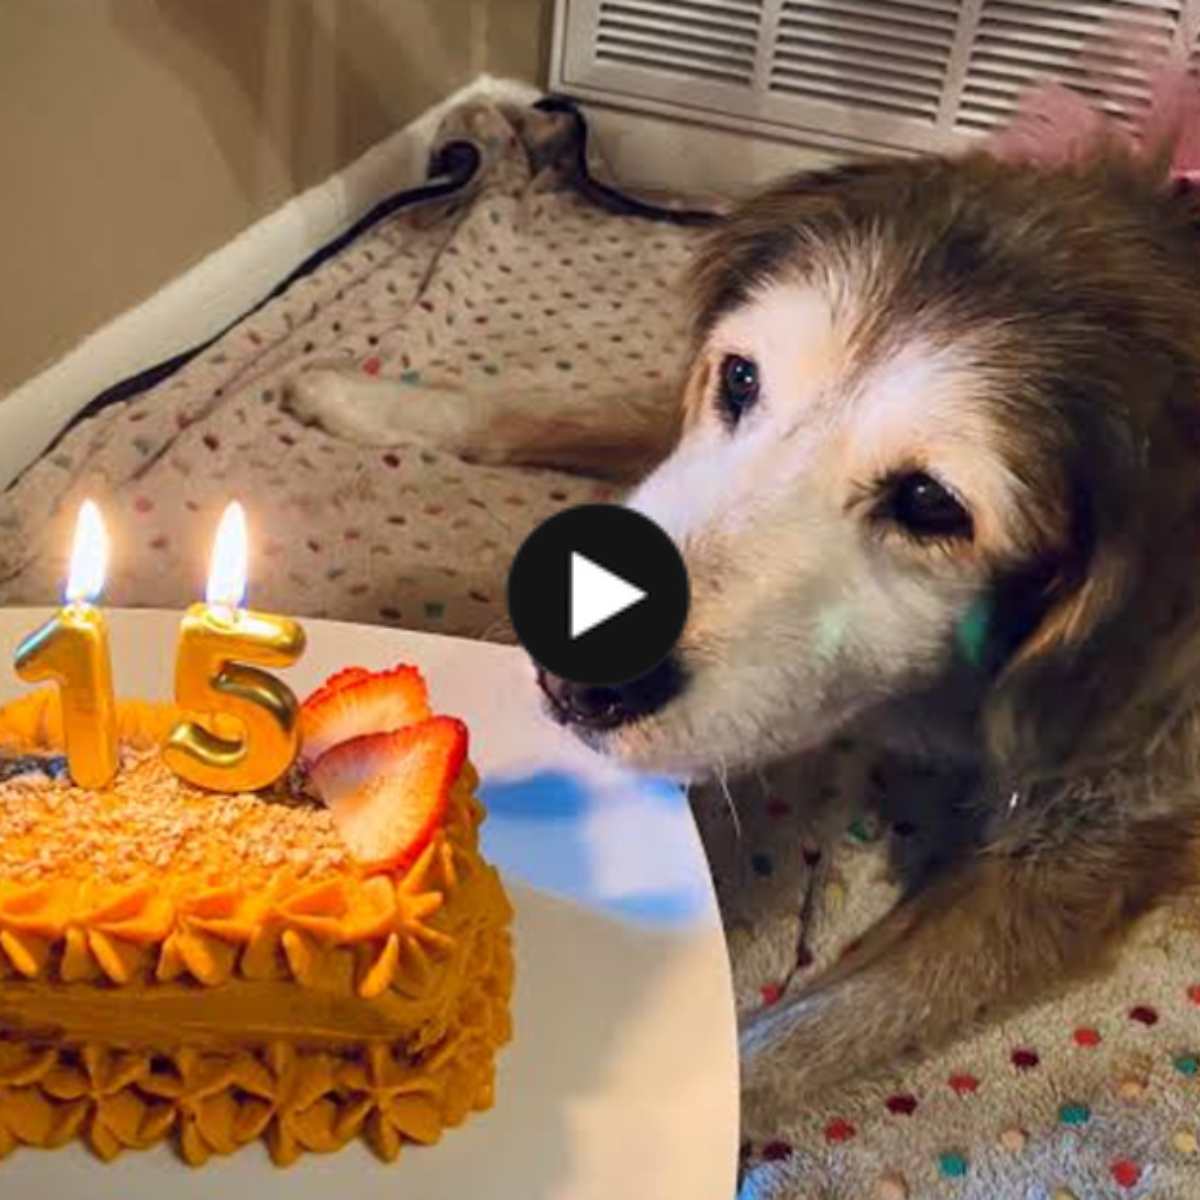 To her, a happy birthday! After fifteen years, the dog finally got a birthday cake, and a tear fell down his cheek.